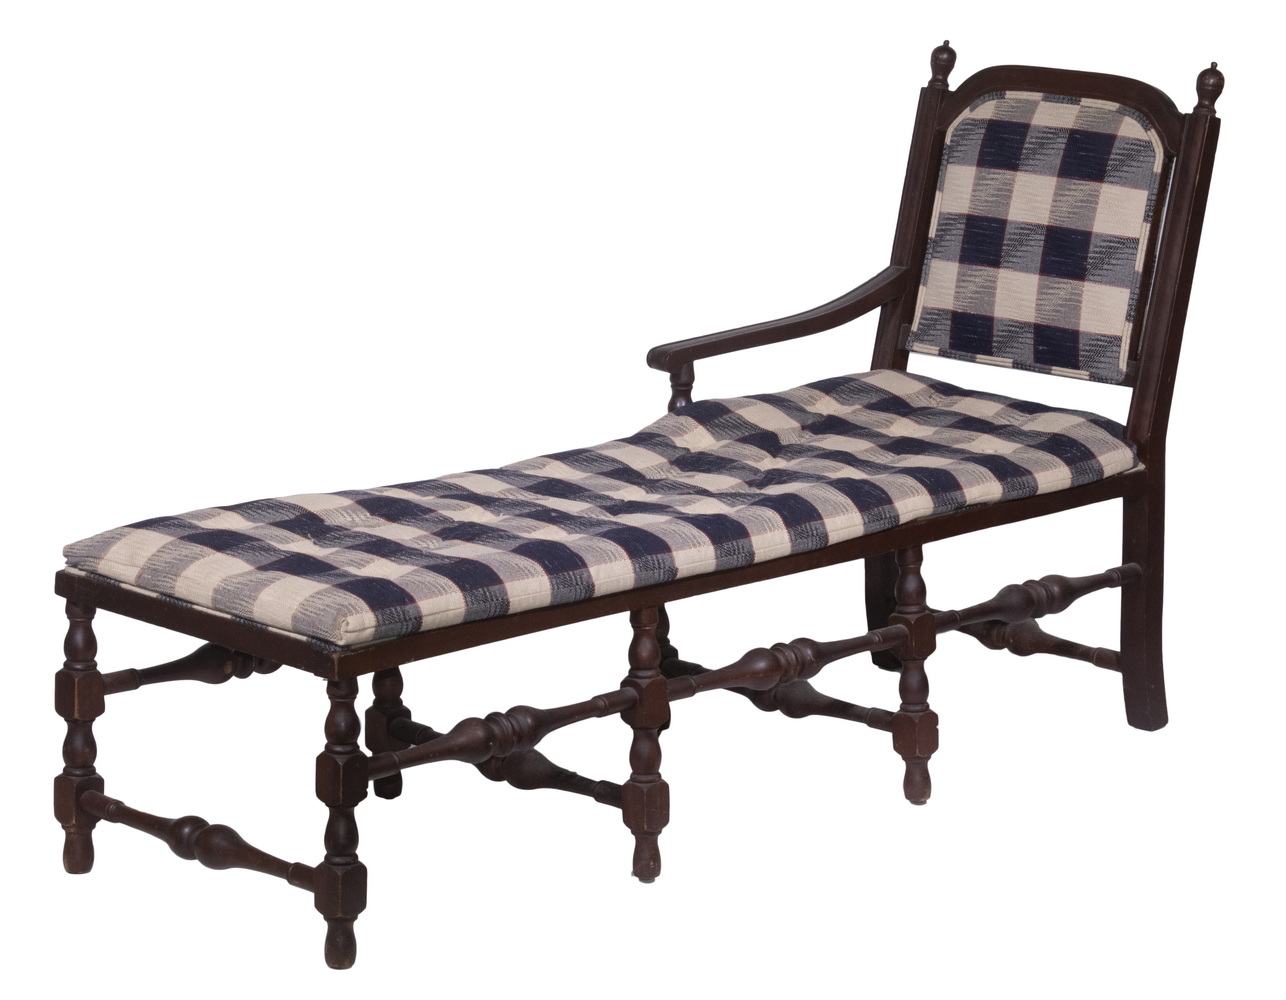 WILLIAM MARY STYLE DAYBED Vintage 2b1580